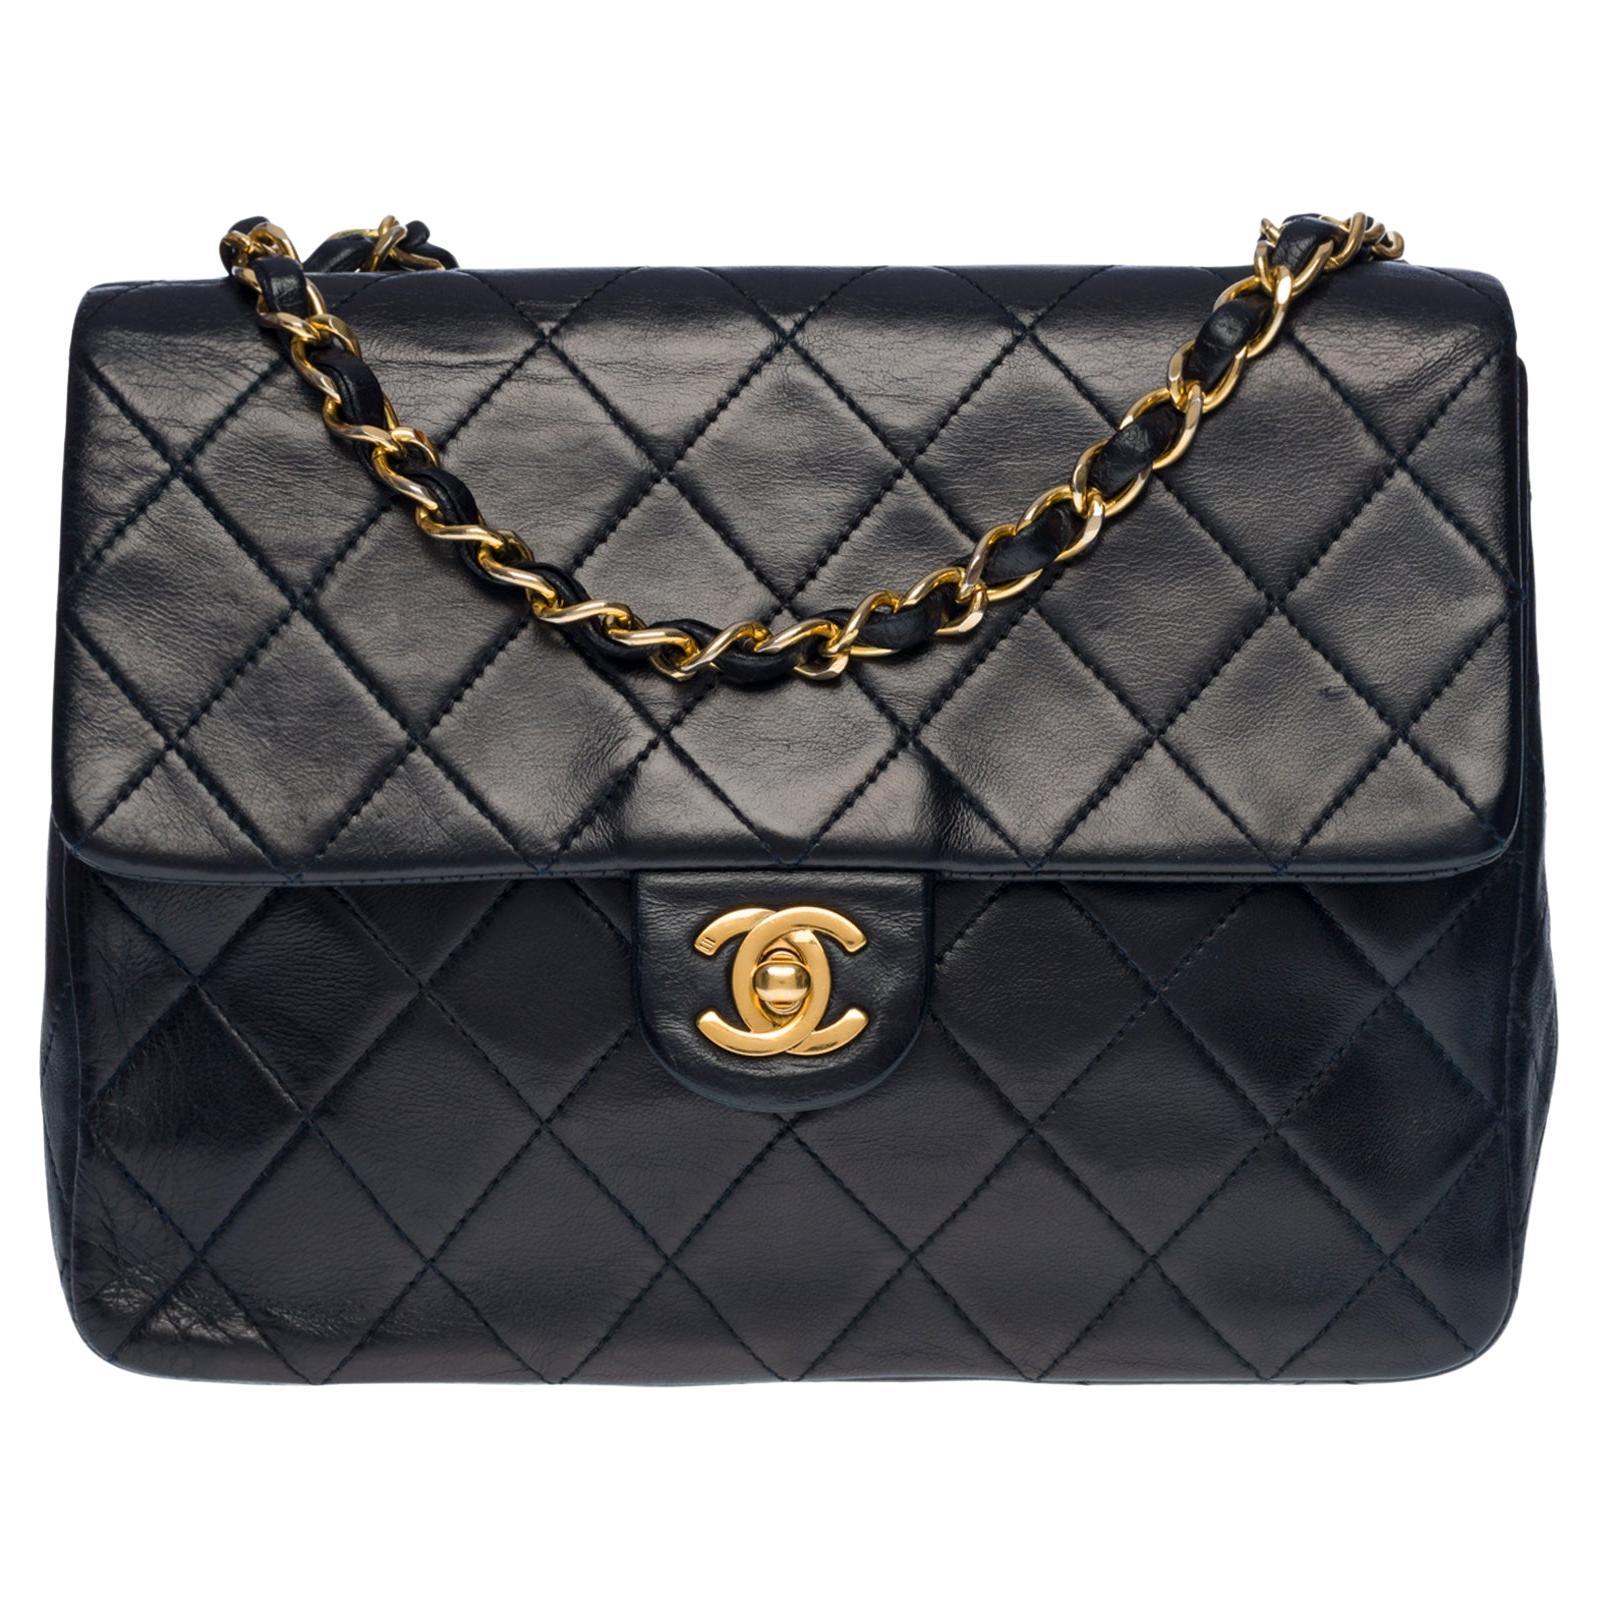 Chanel Mini Timeless flap shoulder bag in navy blue quilted lambskin, GHW For Sale